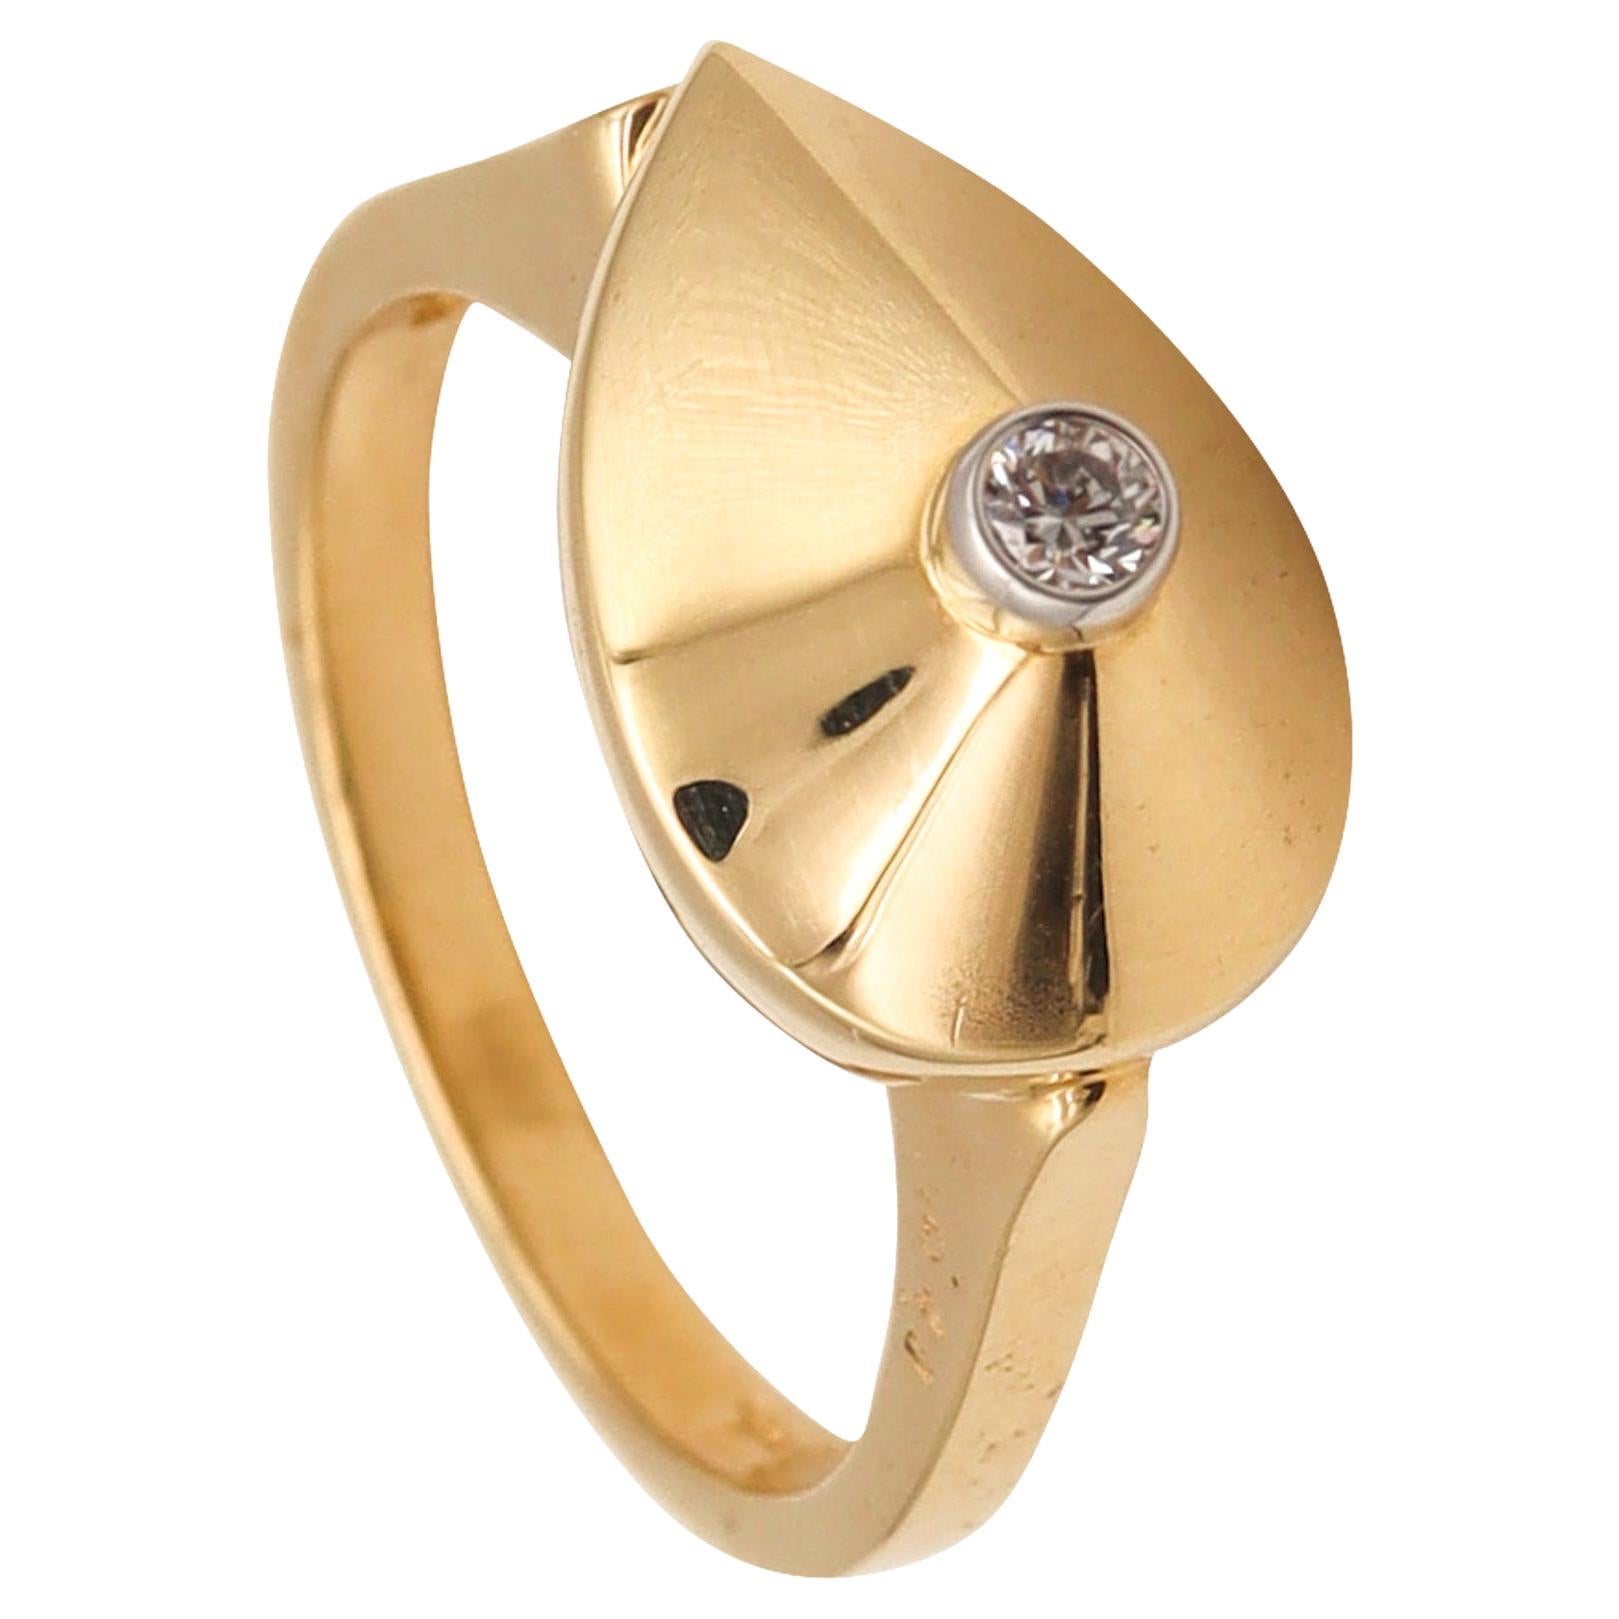 Aletto Brothers Stackable Medium Pear Shaped Ring in 18kt Yellow Gold & Diamonds